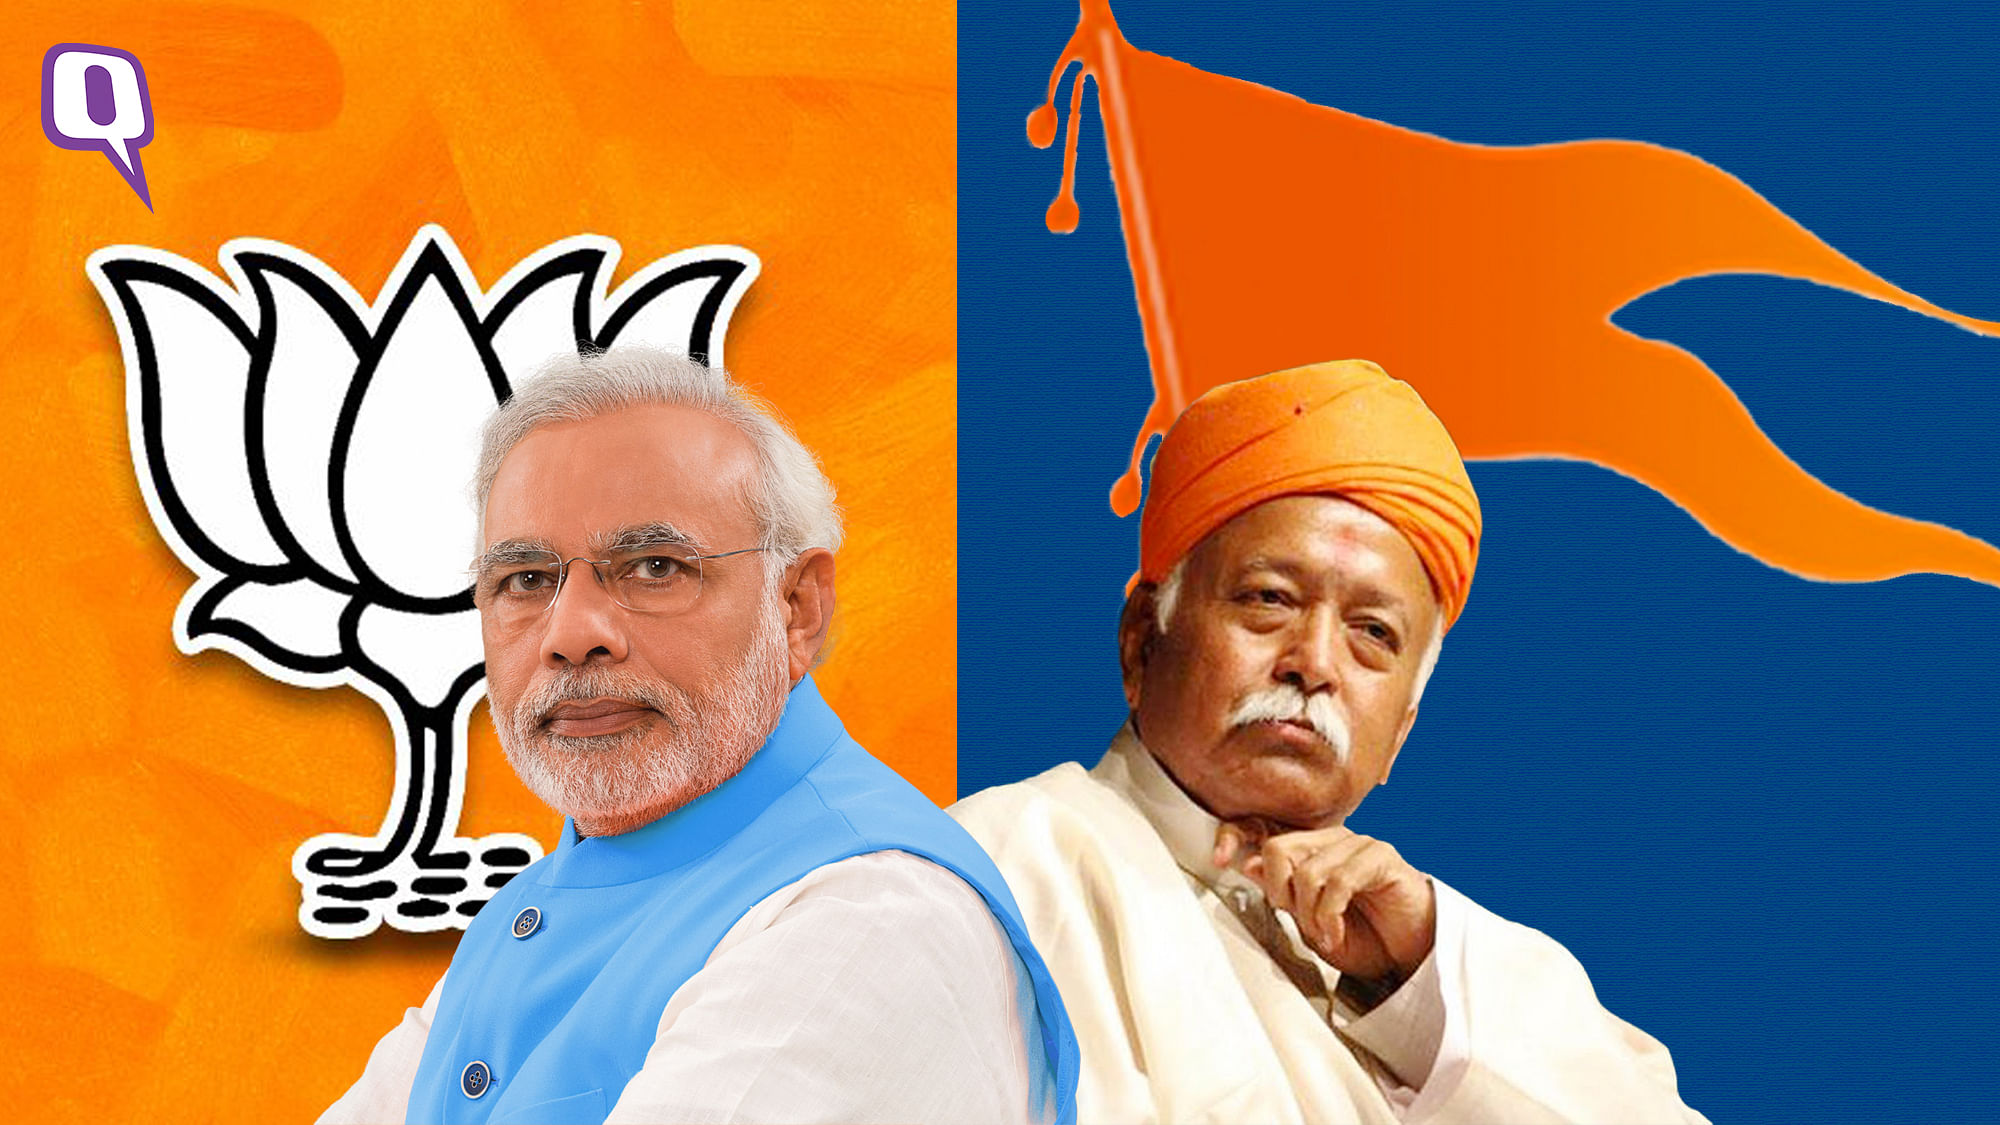 Image of PM Modi and RSS chief Mohan Bhagwat used for representational purposes.